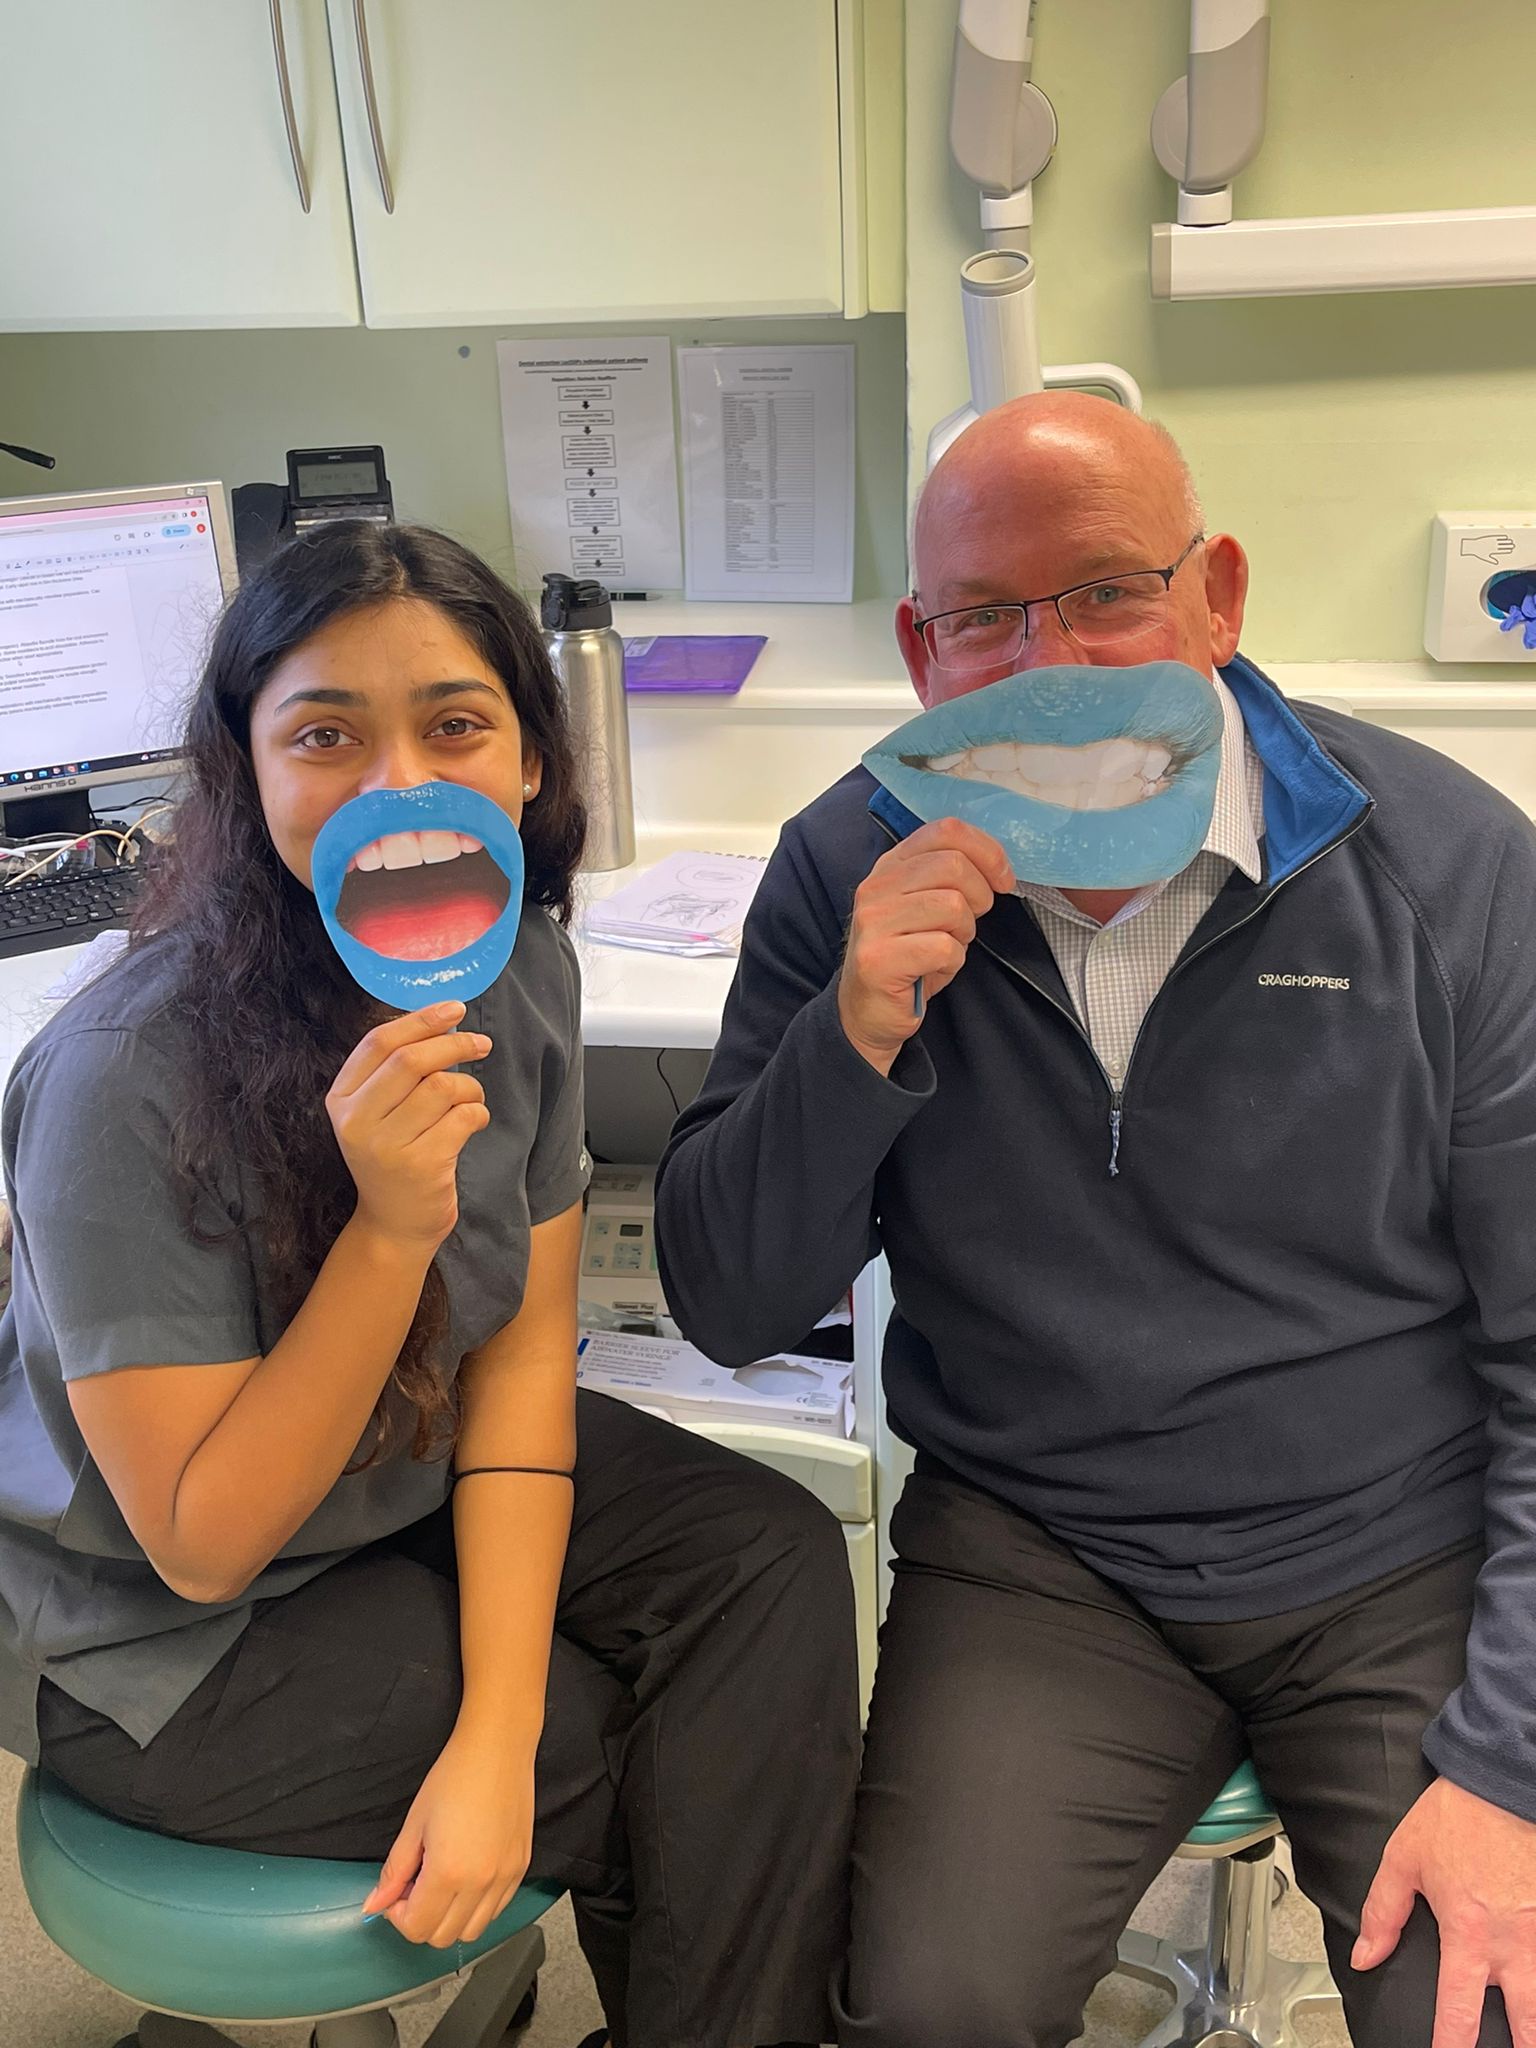 Read what Brintha, one of our incredible VTE Dentists in Birmingham, had to say about her VTE application process and her overall VTE journey with us...